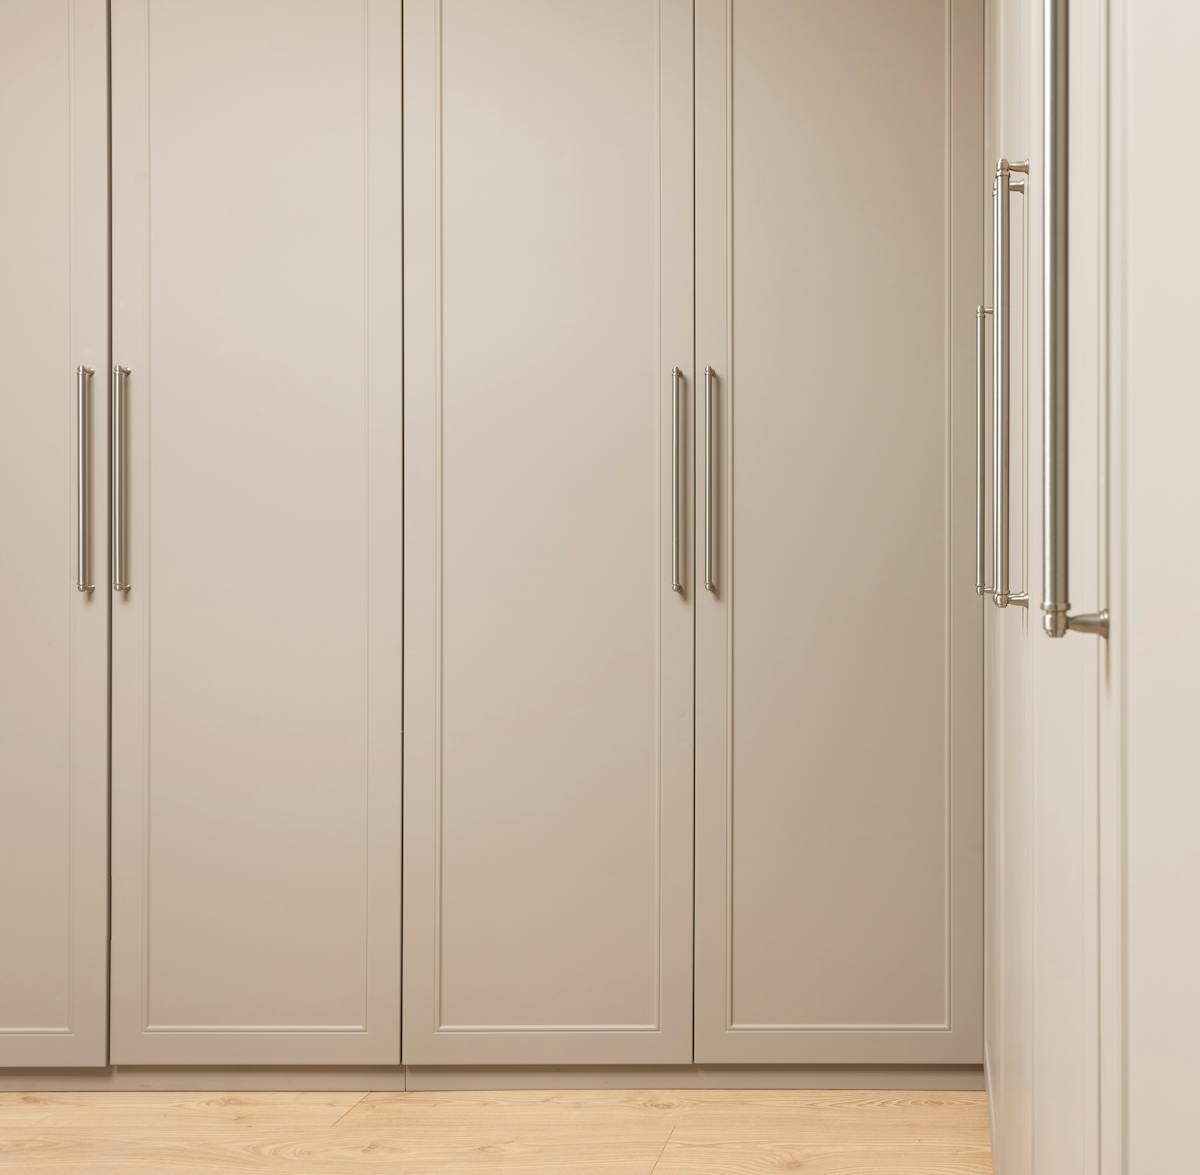 Contemporary closet with beige doors and metal handles above floor in modern light house